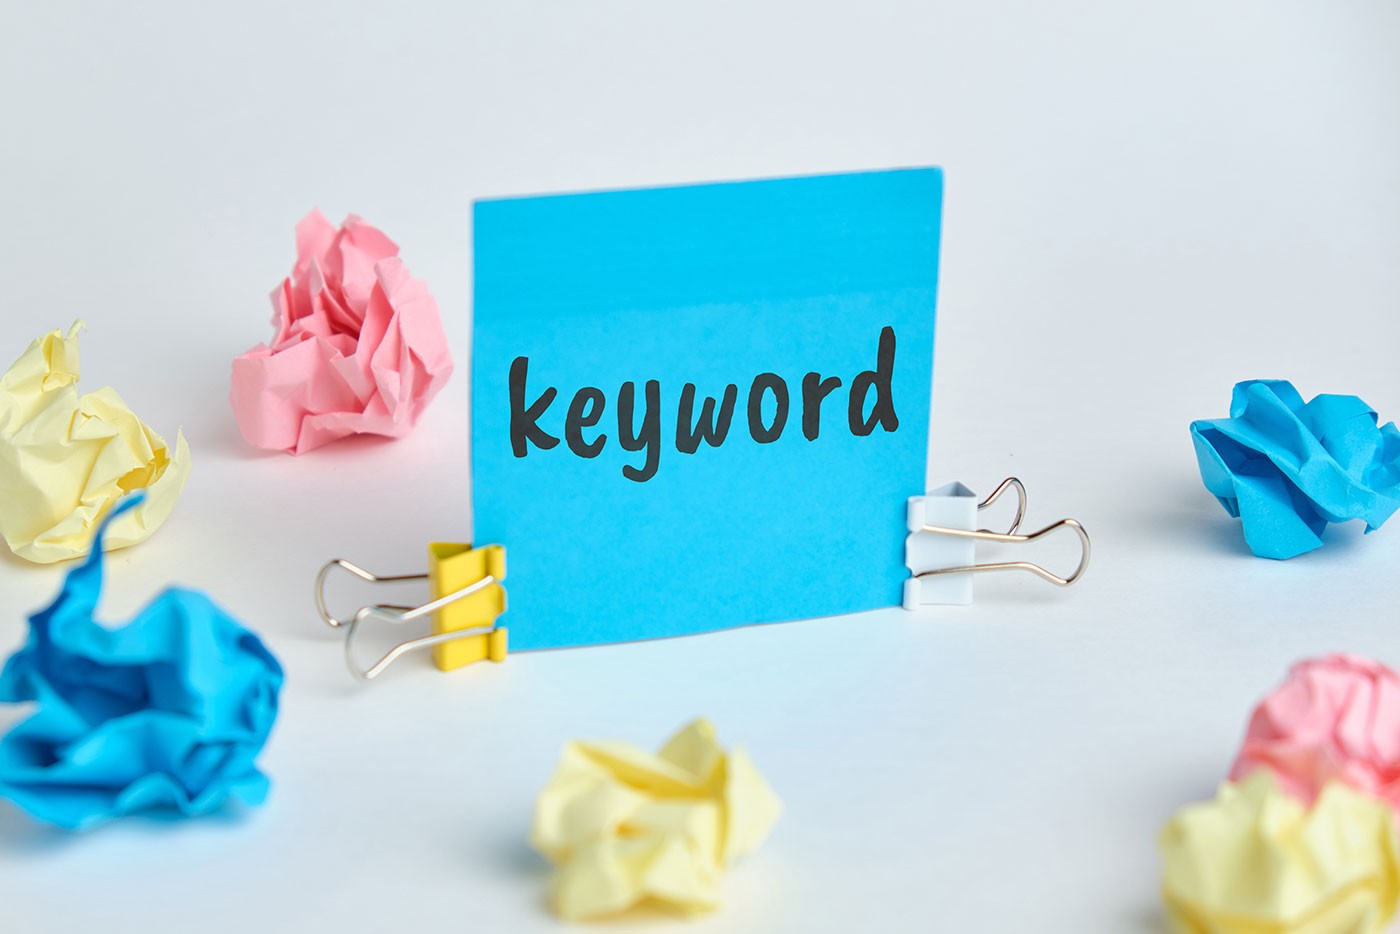 Find and Use the Best SEO Keywords for Marketing